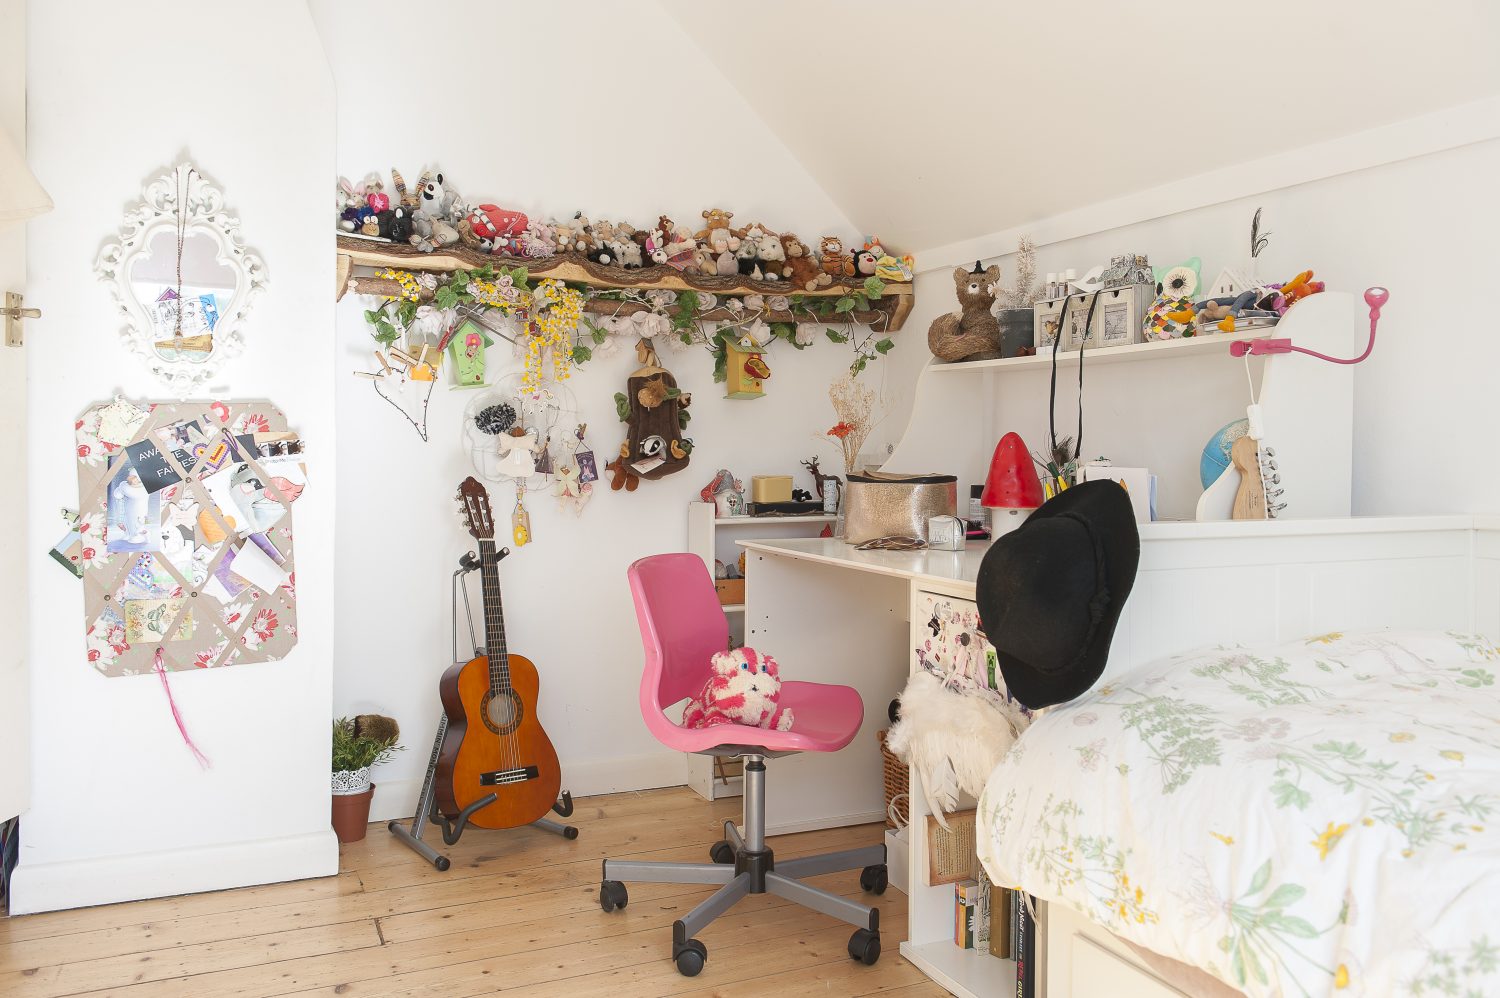 Elsie’s bedroom is pure white and is calm and tidy, save for a single rustic oak shelf packed full of teddies and toys